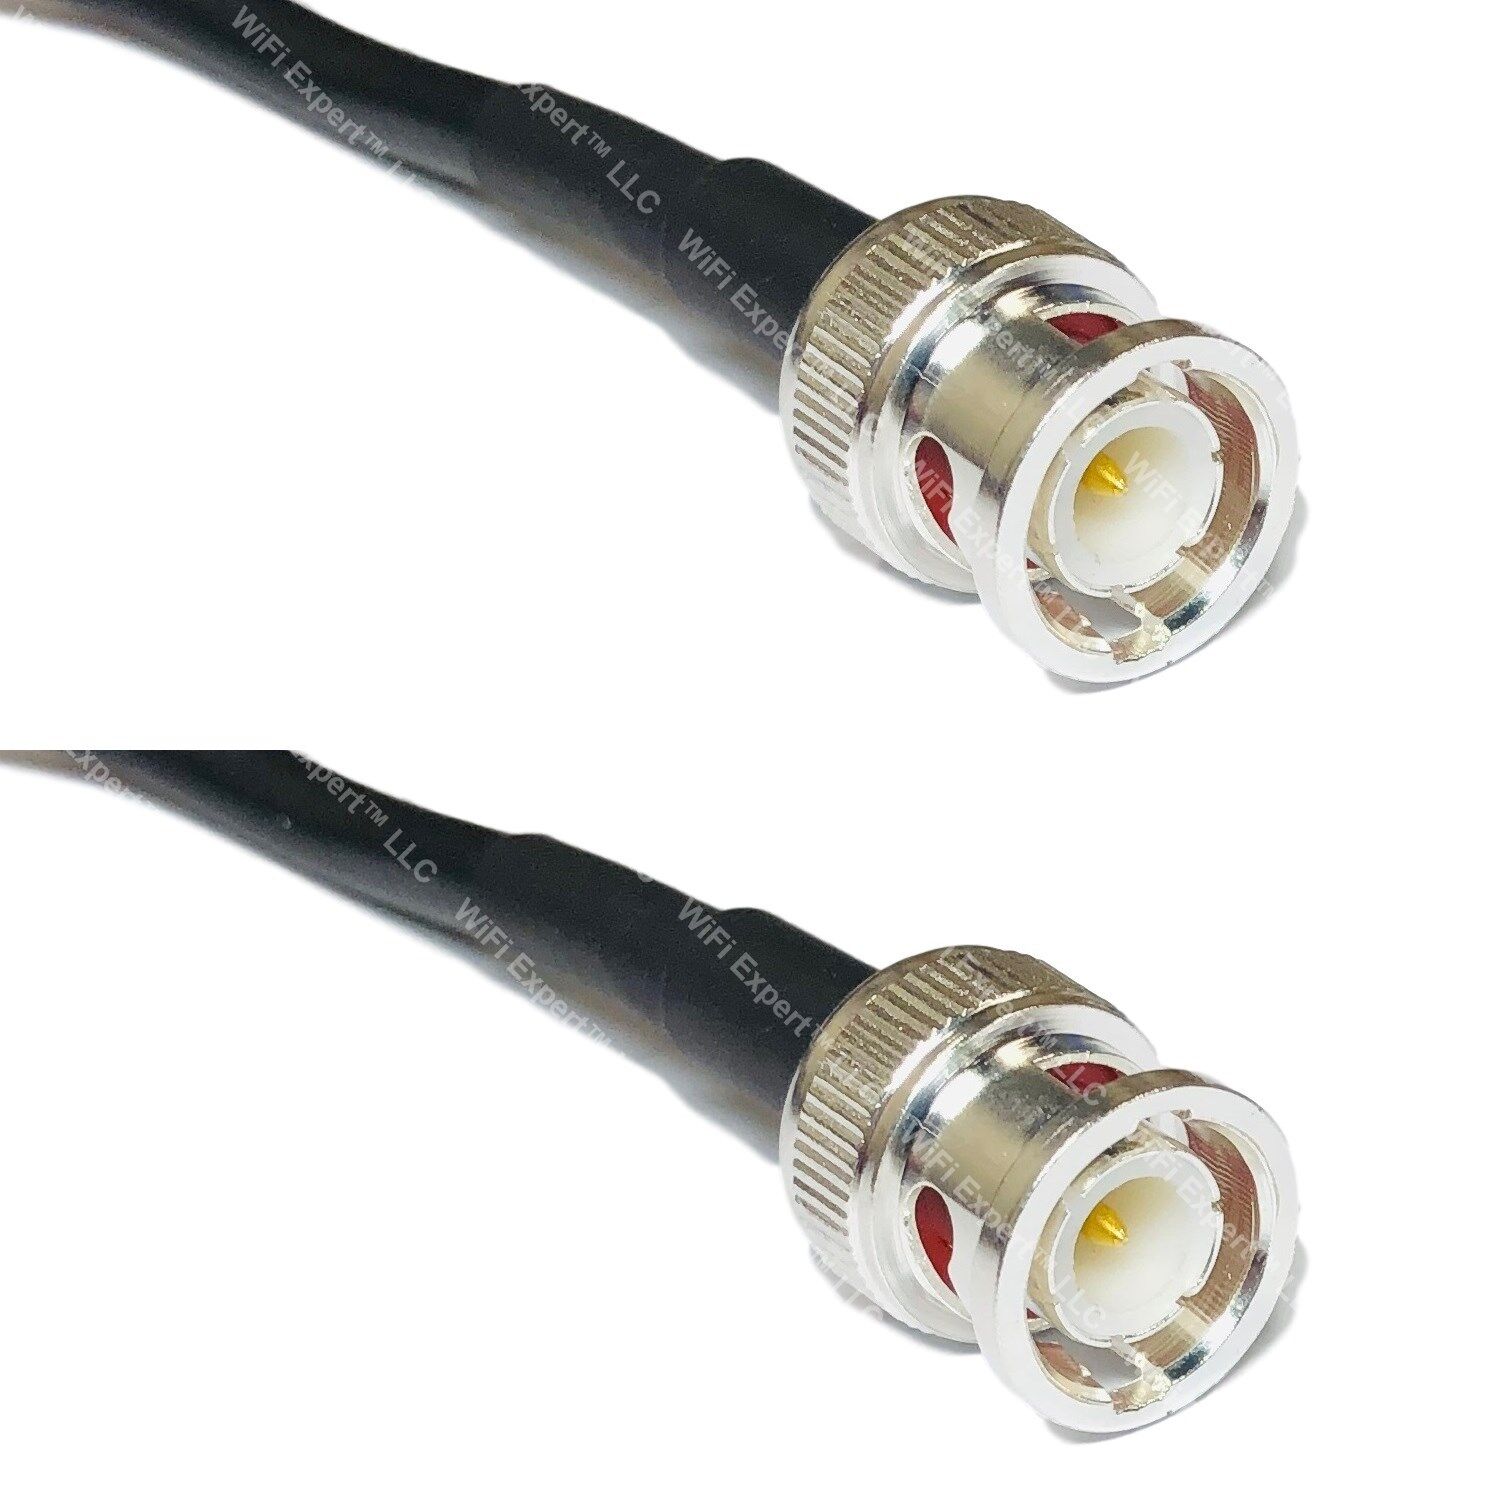 LMR240 BNC MALE to BNC MALE Coaxial RF Pigtail Coaxial Cable USA